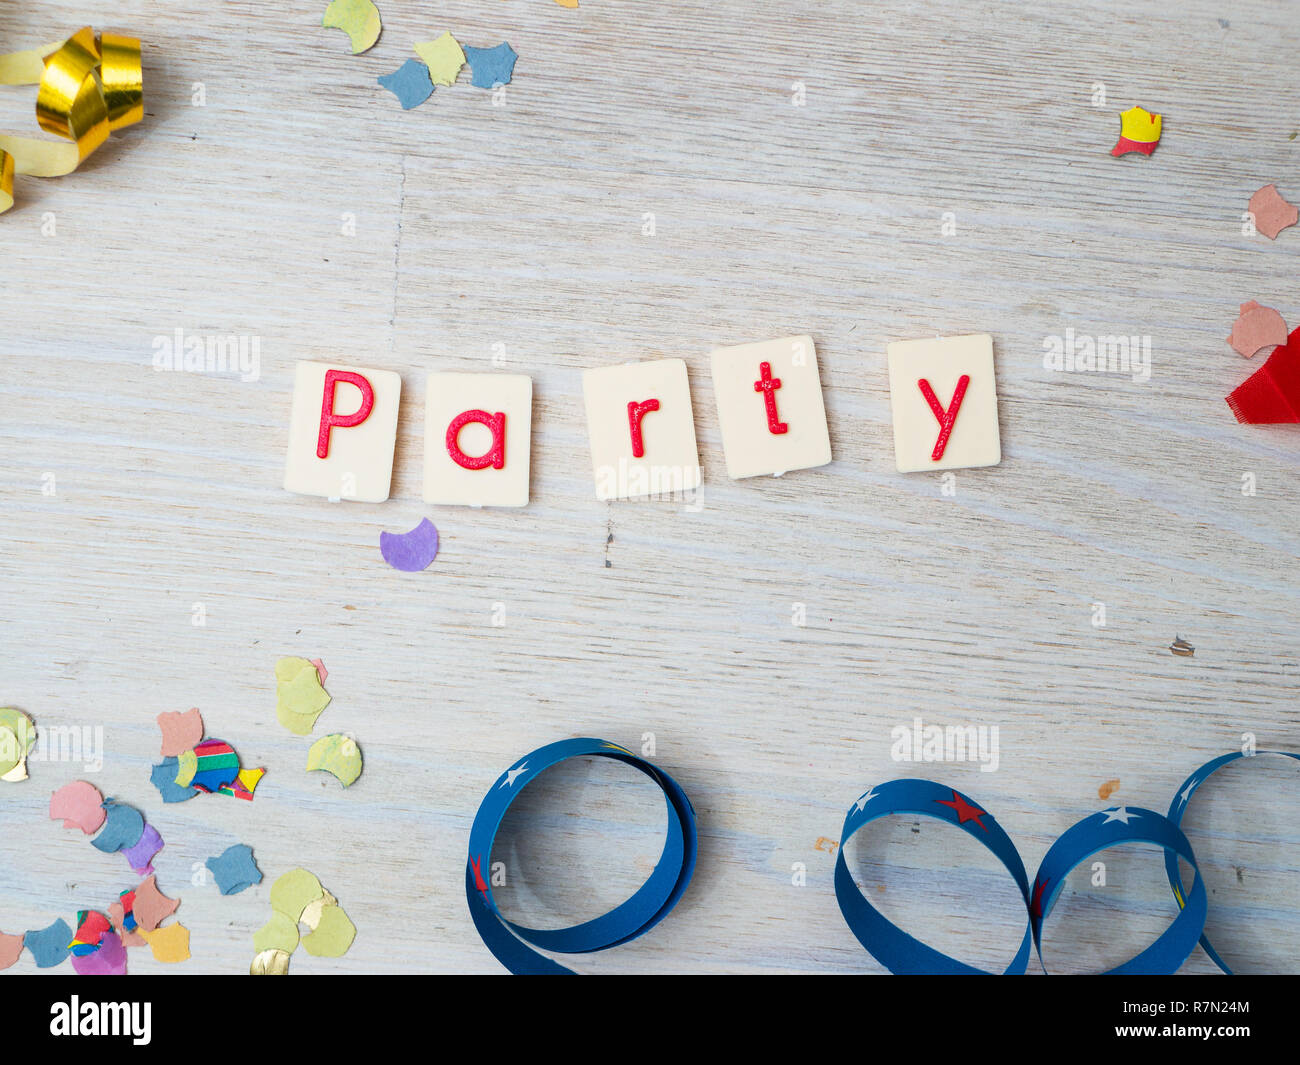 Party Lettering with party decoration on, concept image, wooden background Stock Photo